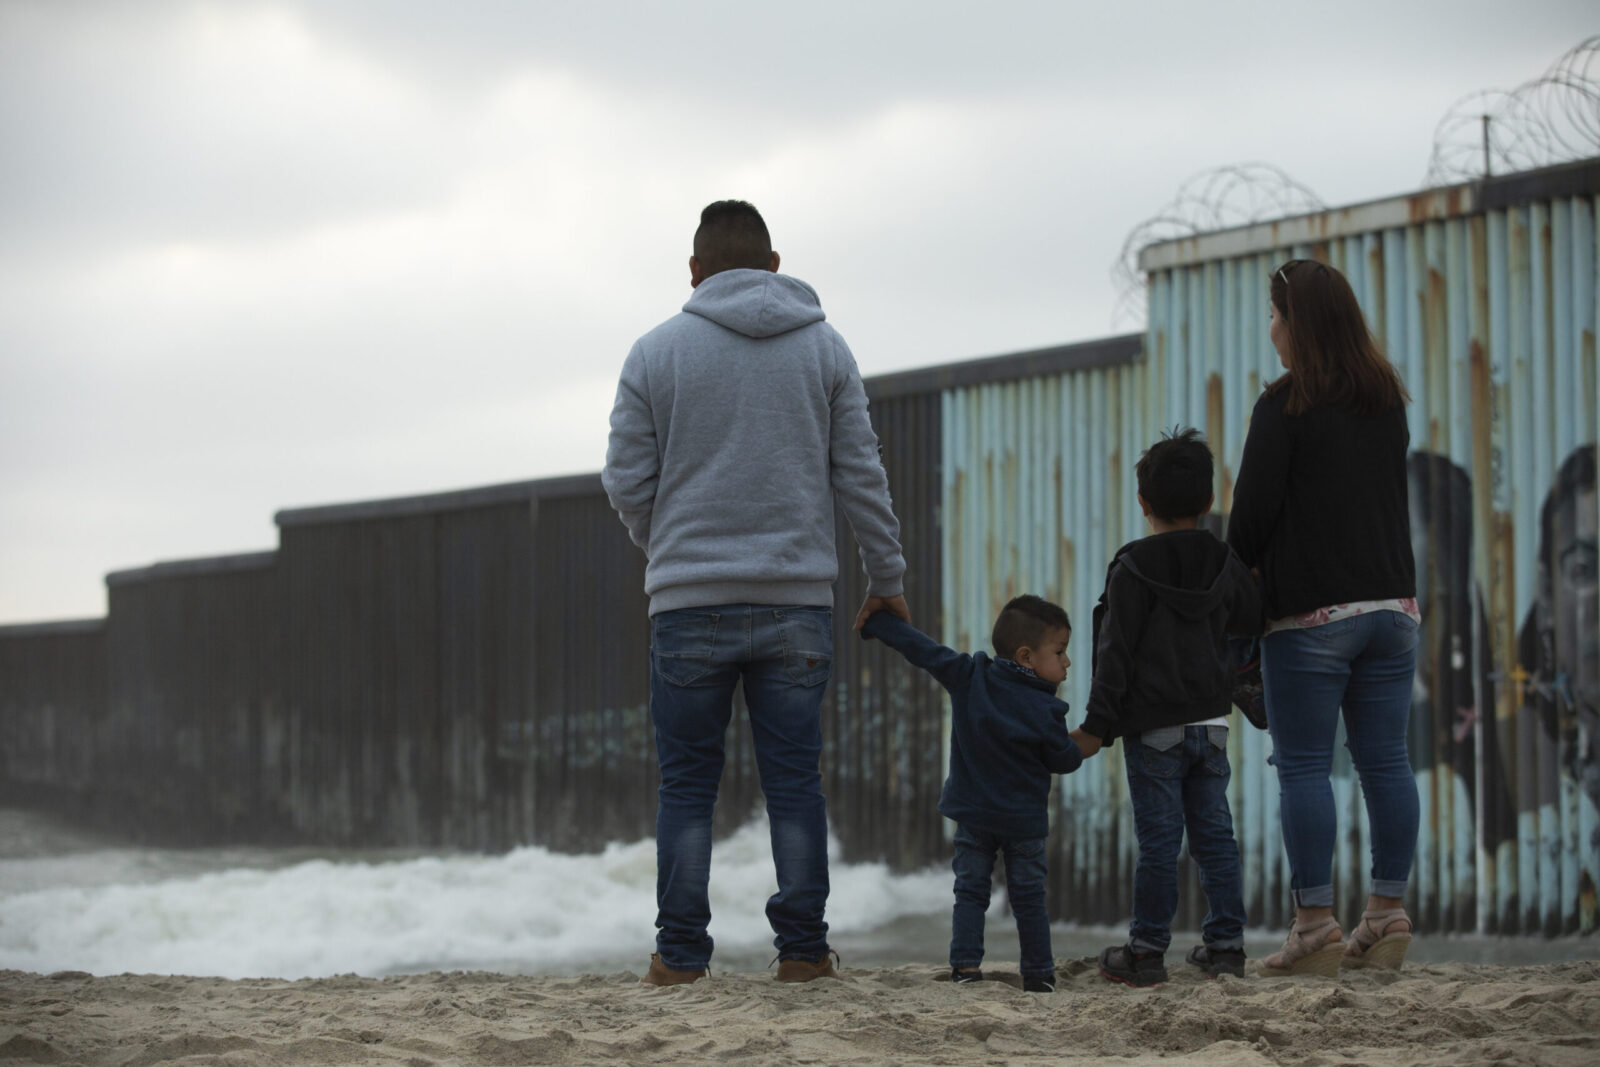 Tijuana, Baja California, Mexico - April 11, 2021: A family stands in front of the USA Mexico border wall.